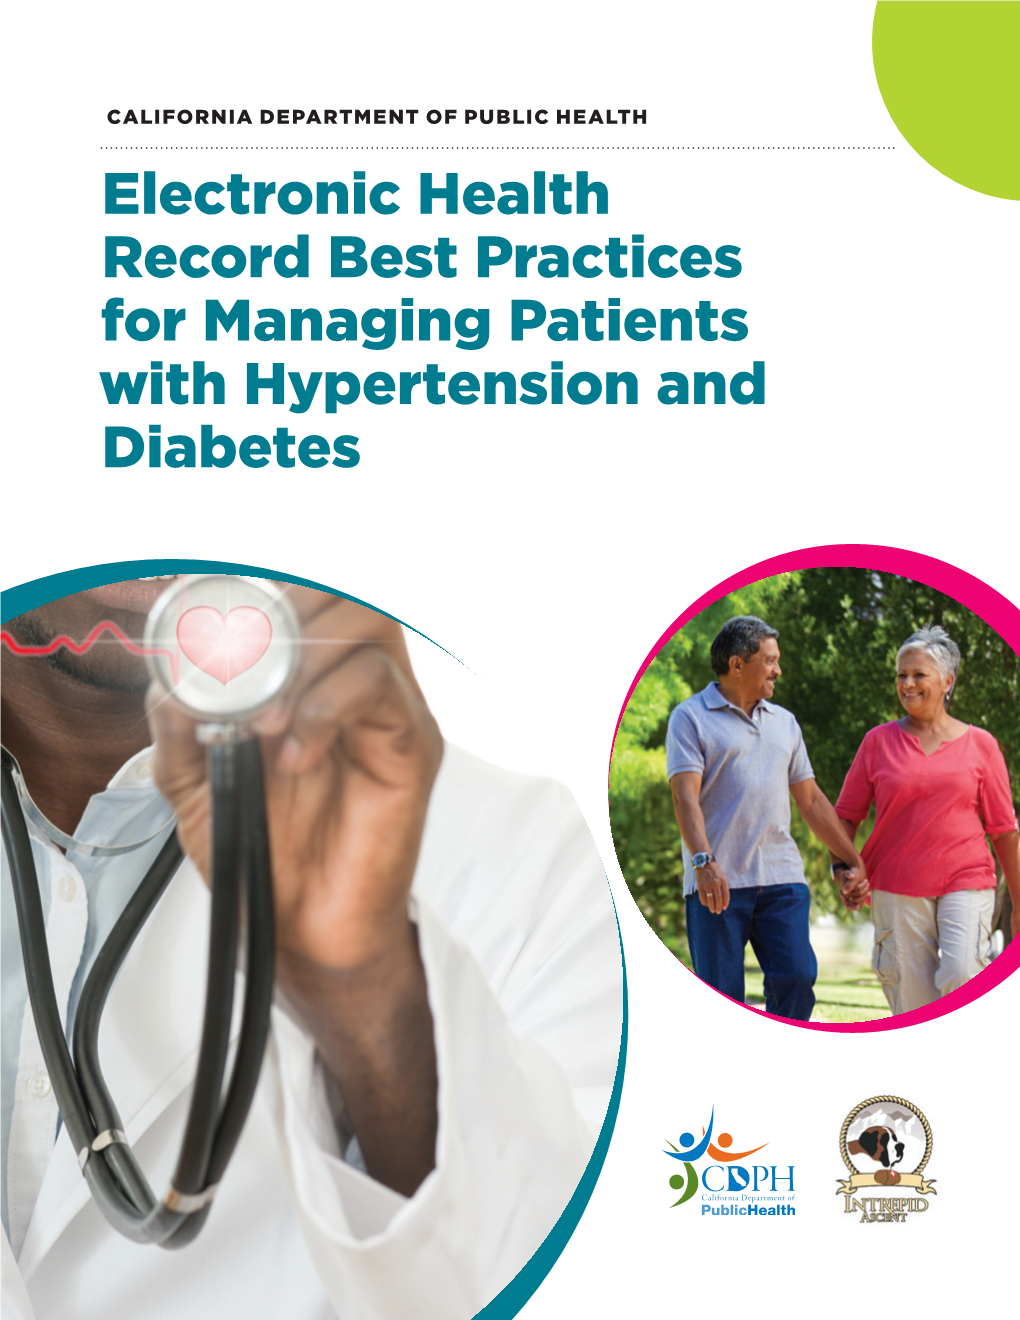 Electronic Health Record Best Practices for Managing Patients with Hypertension and Diabetes Contents